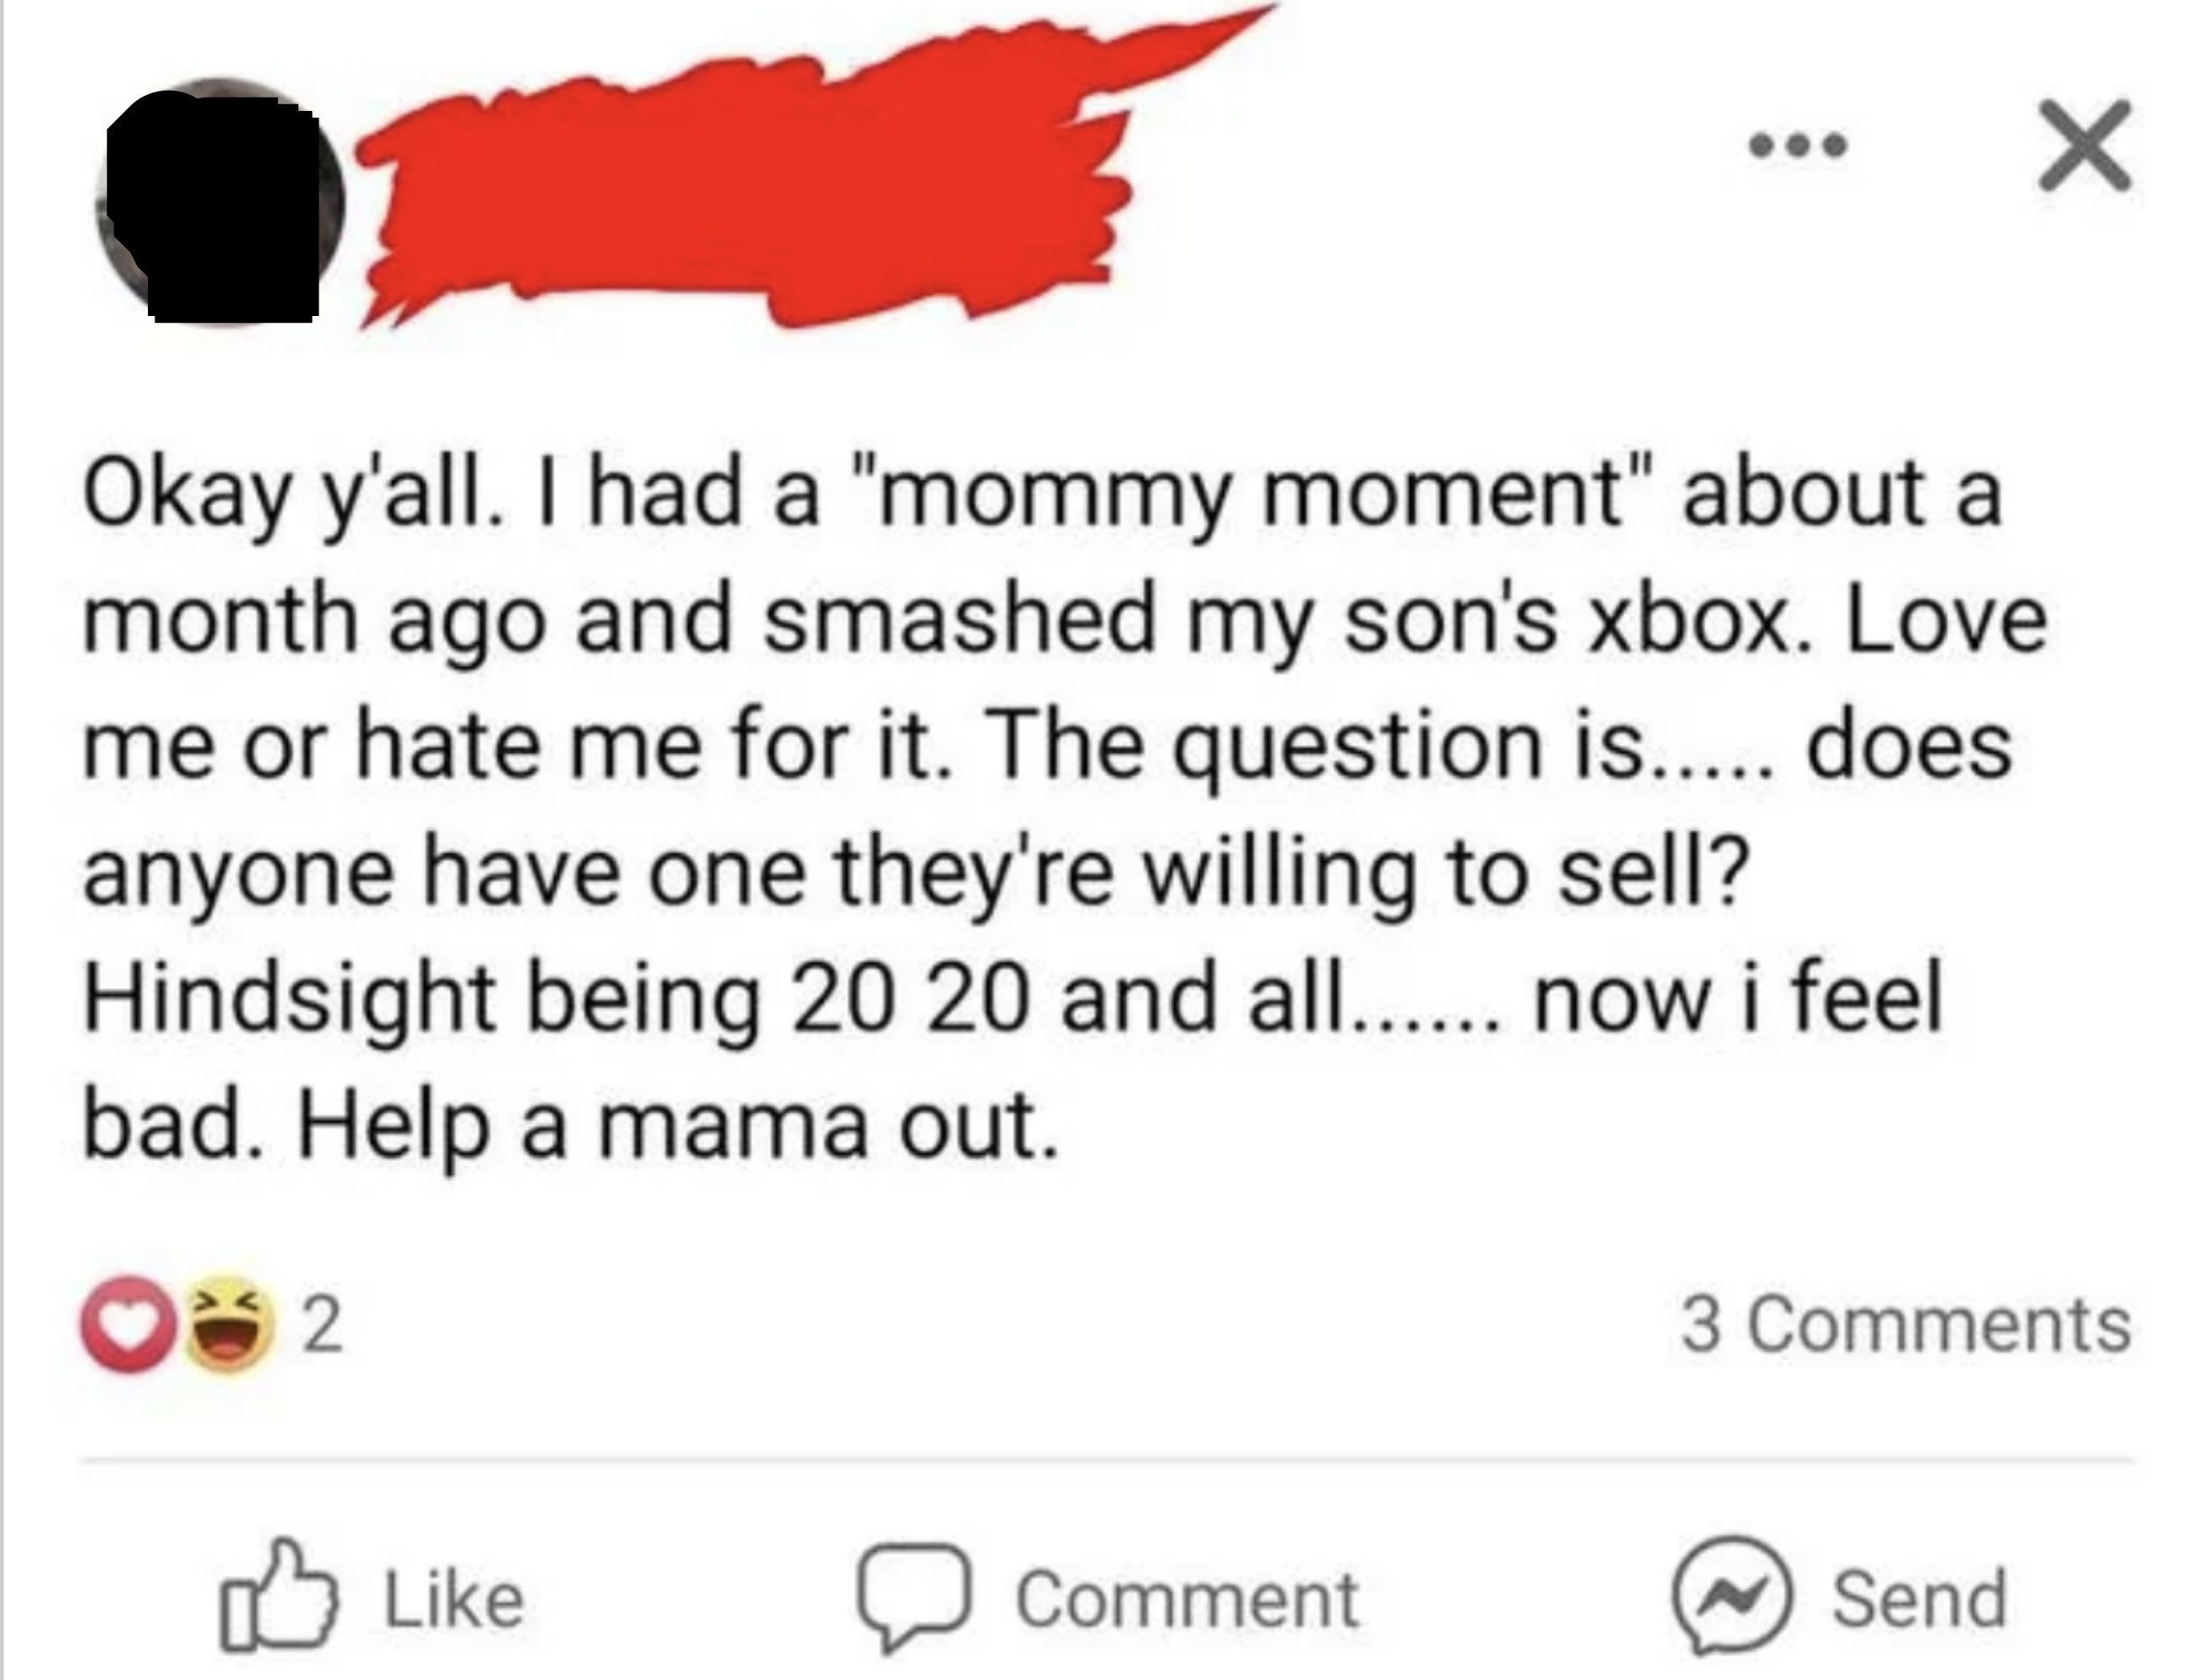 She had a &quot;mommy moment&quot; and broke her son&#x27;s Xbox and now wonders if anyone has one they&#x27;re willing to sell, &quot;hindsight being 20/20 and all,&quot; now she feels bad, so &quot;help a mama out&quot;